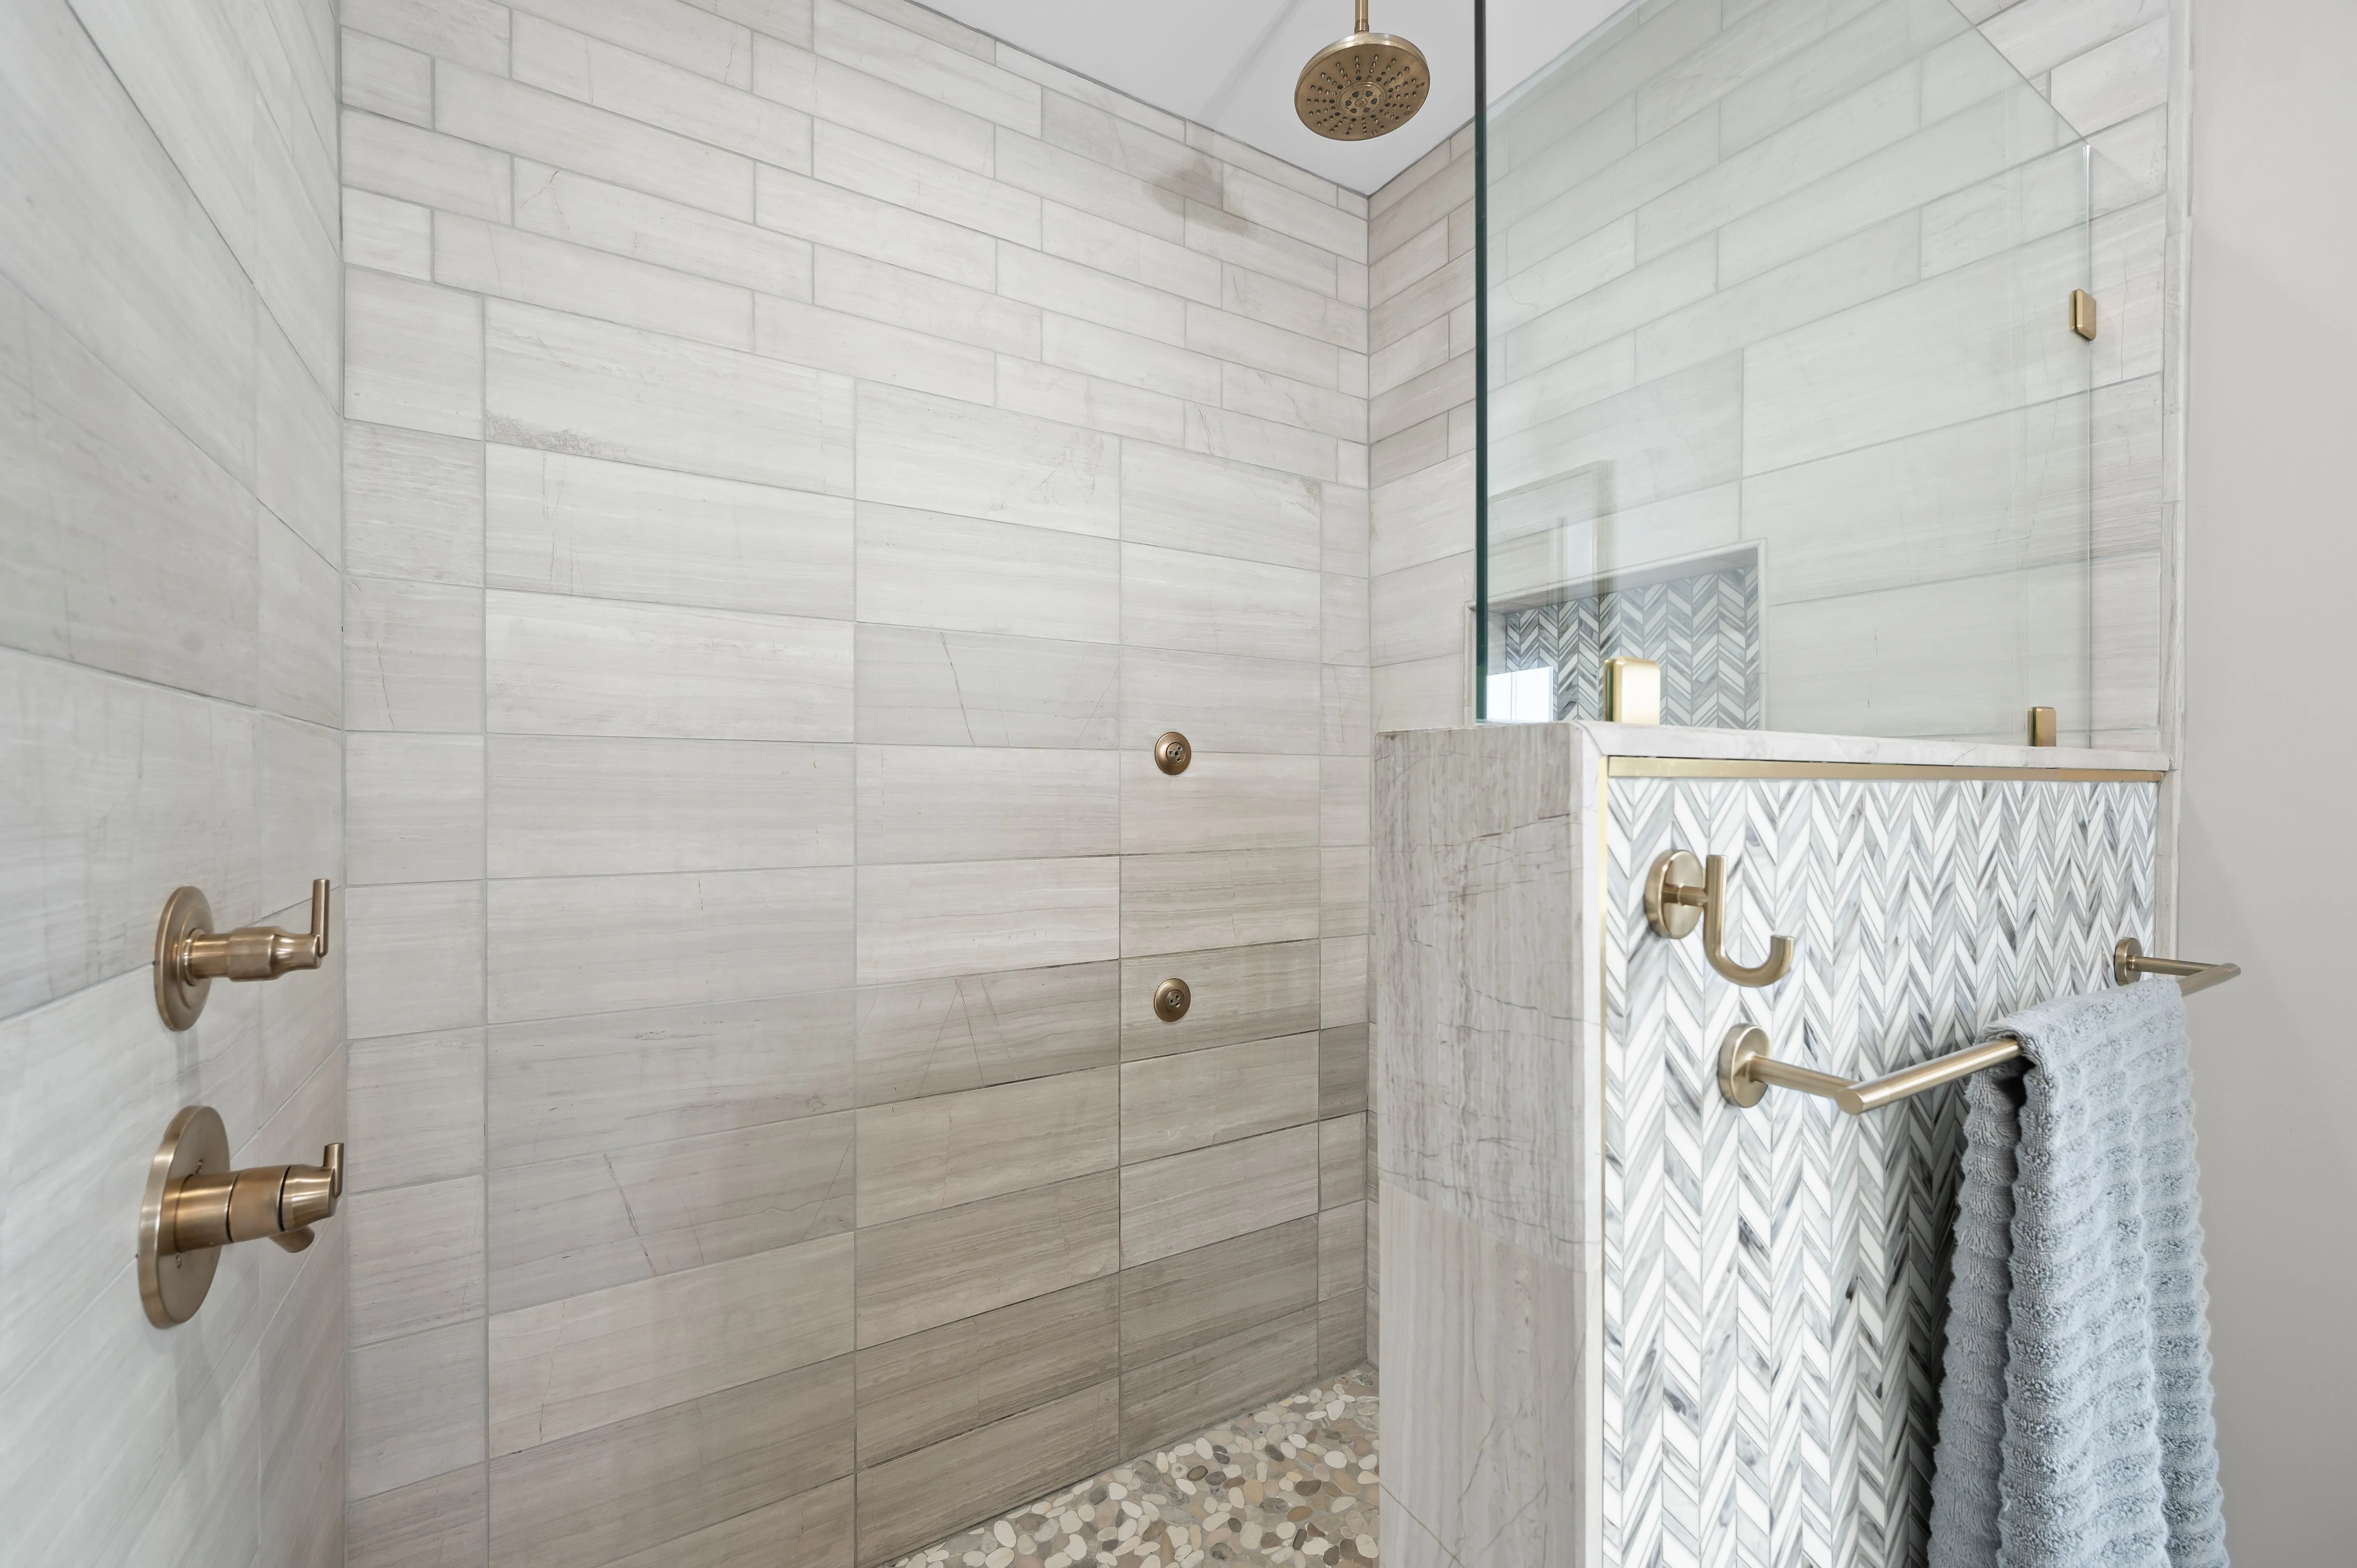 Modern bathroom with glass shower enclosure and white subway tiles.